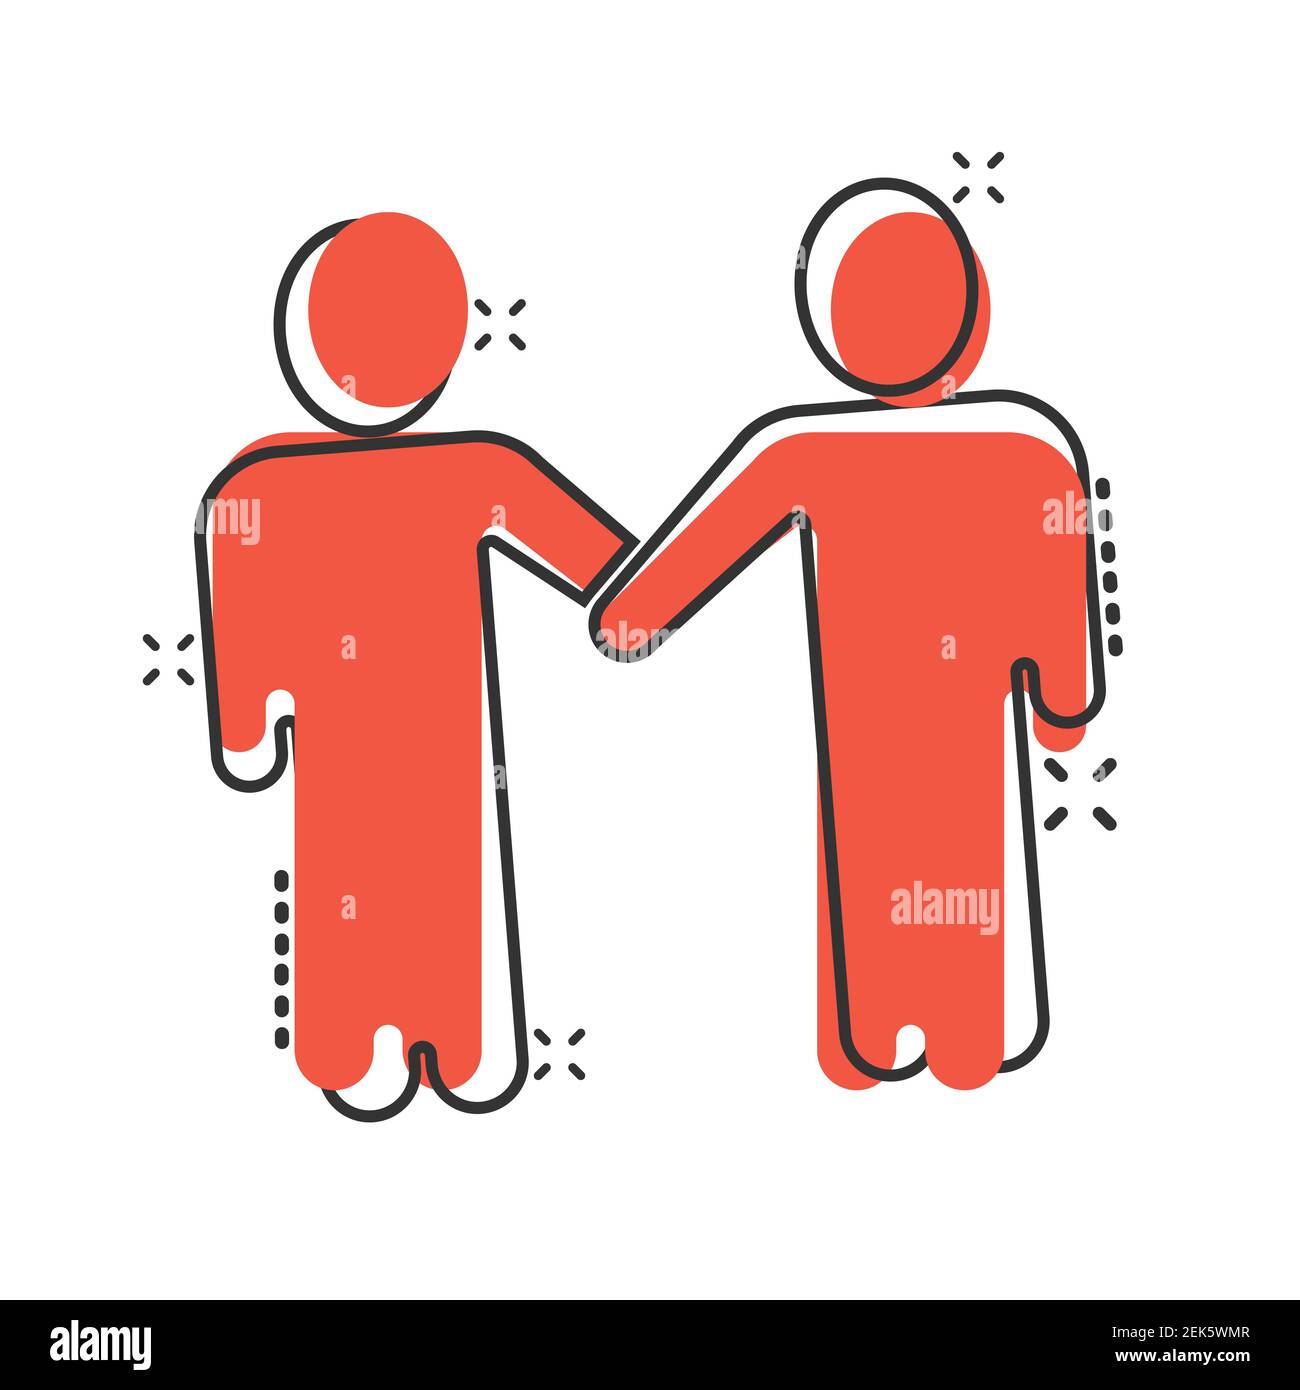 Business Manner Greetings Gesture Stick Figure Pictogram Icon